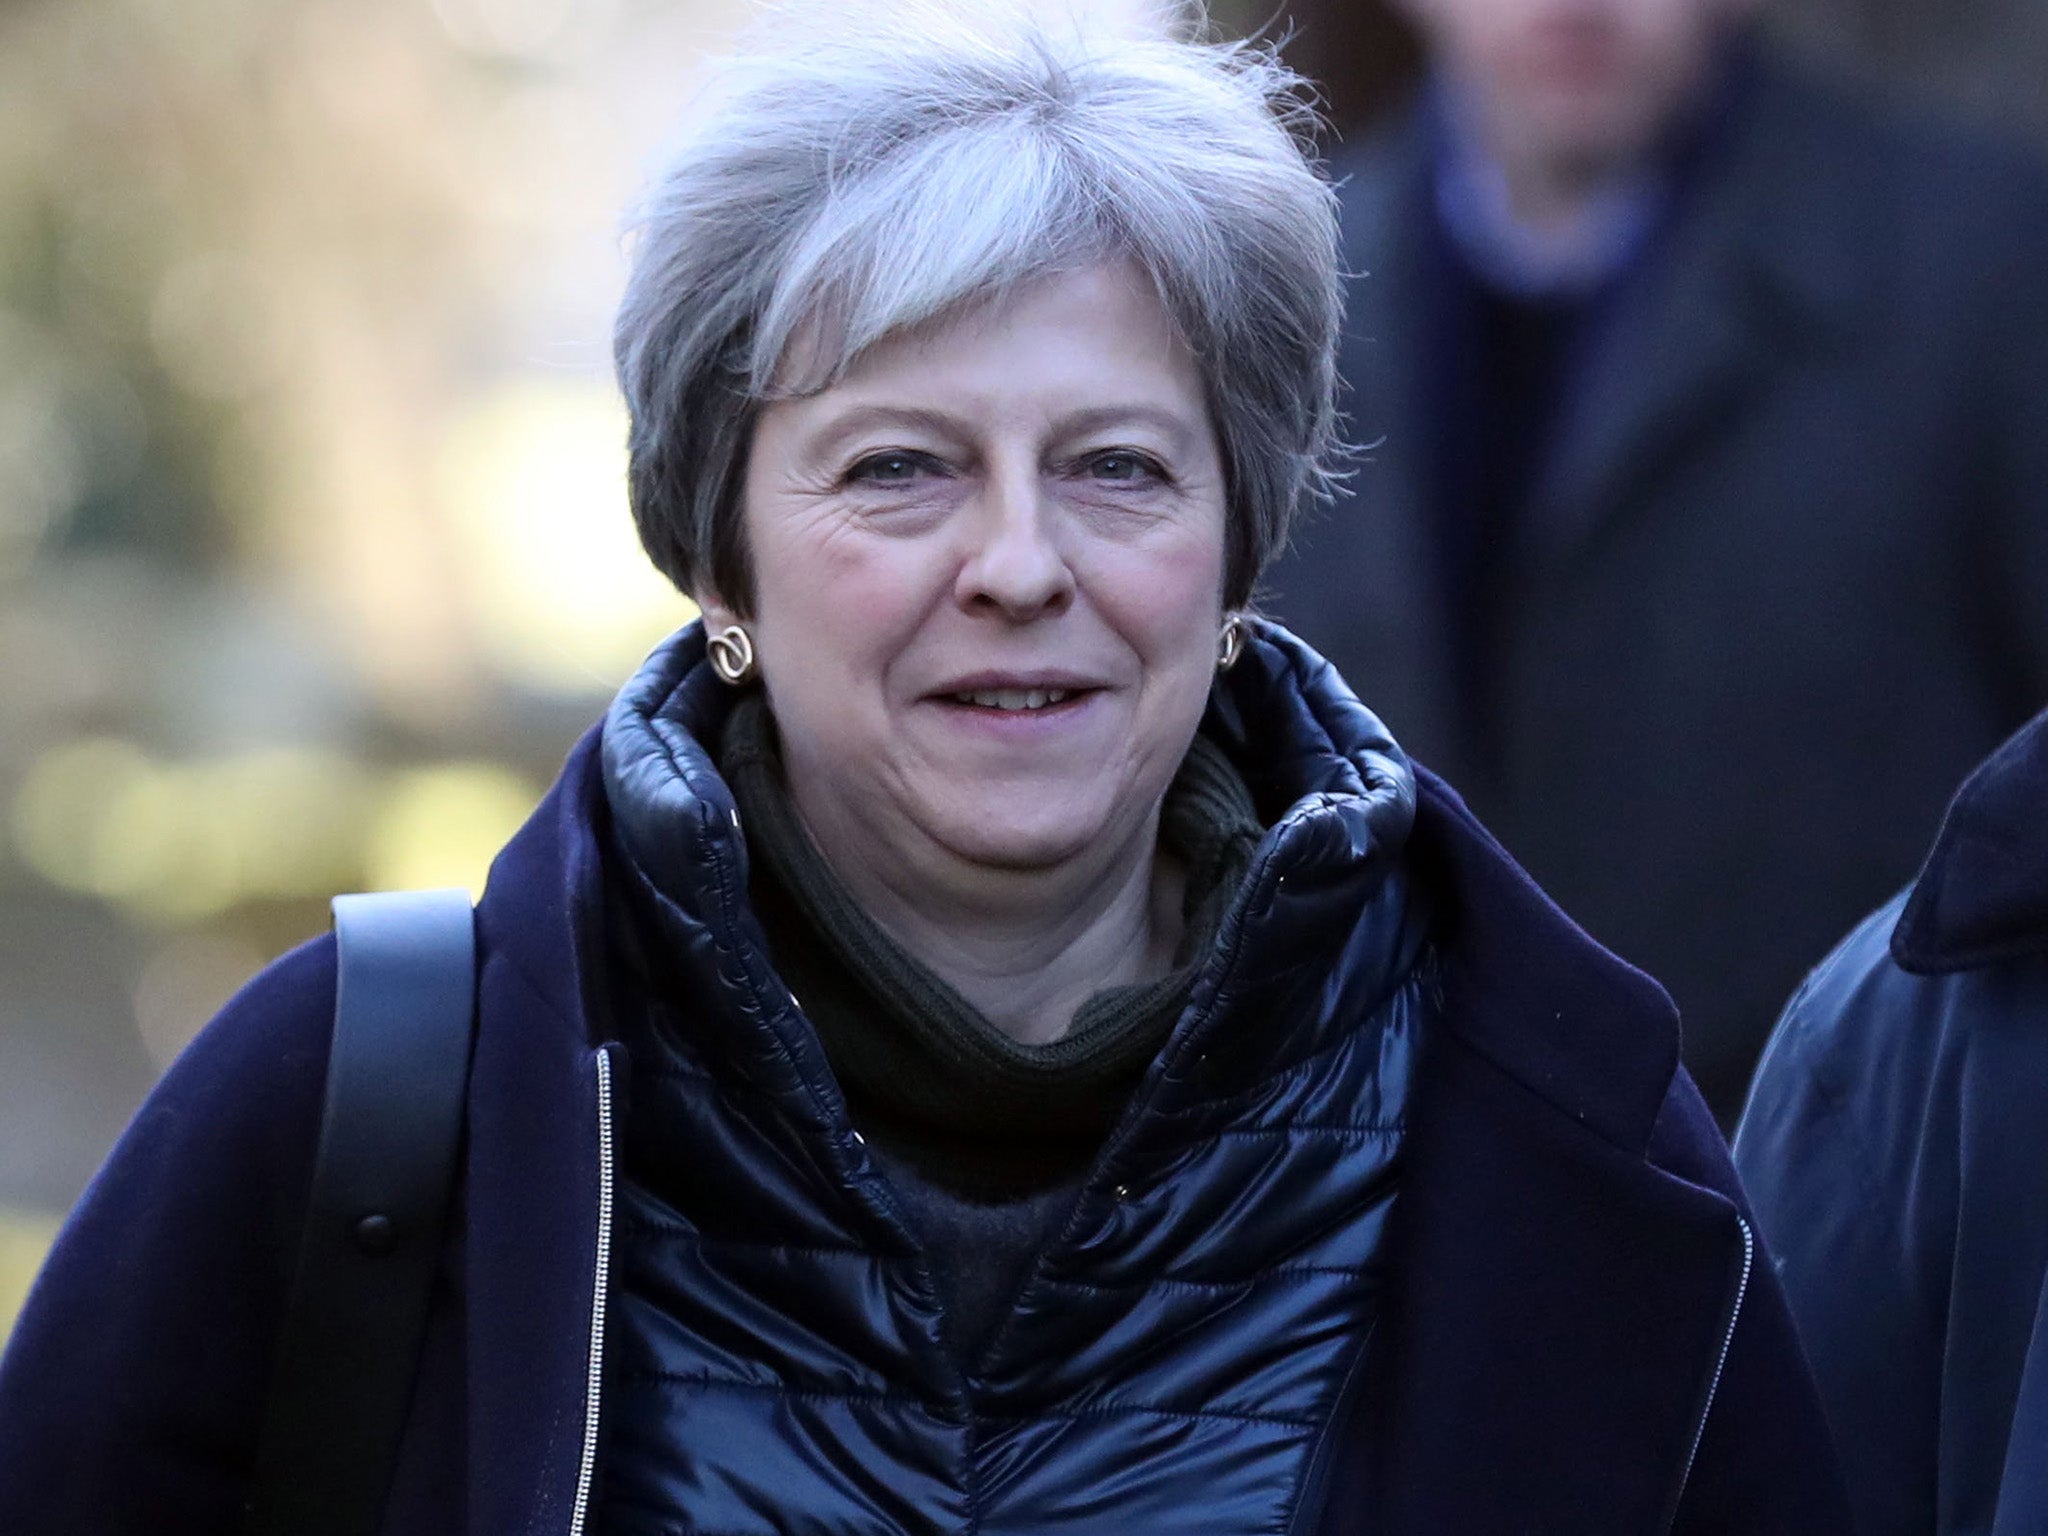 The Prime Minister is to take part in meetings at Stormont House to encourage the Northern Irish parties to resolve differences